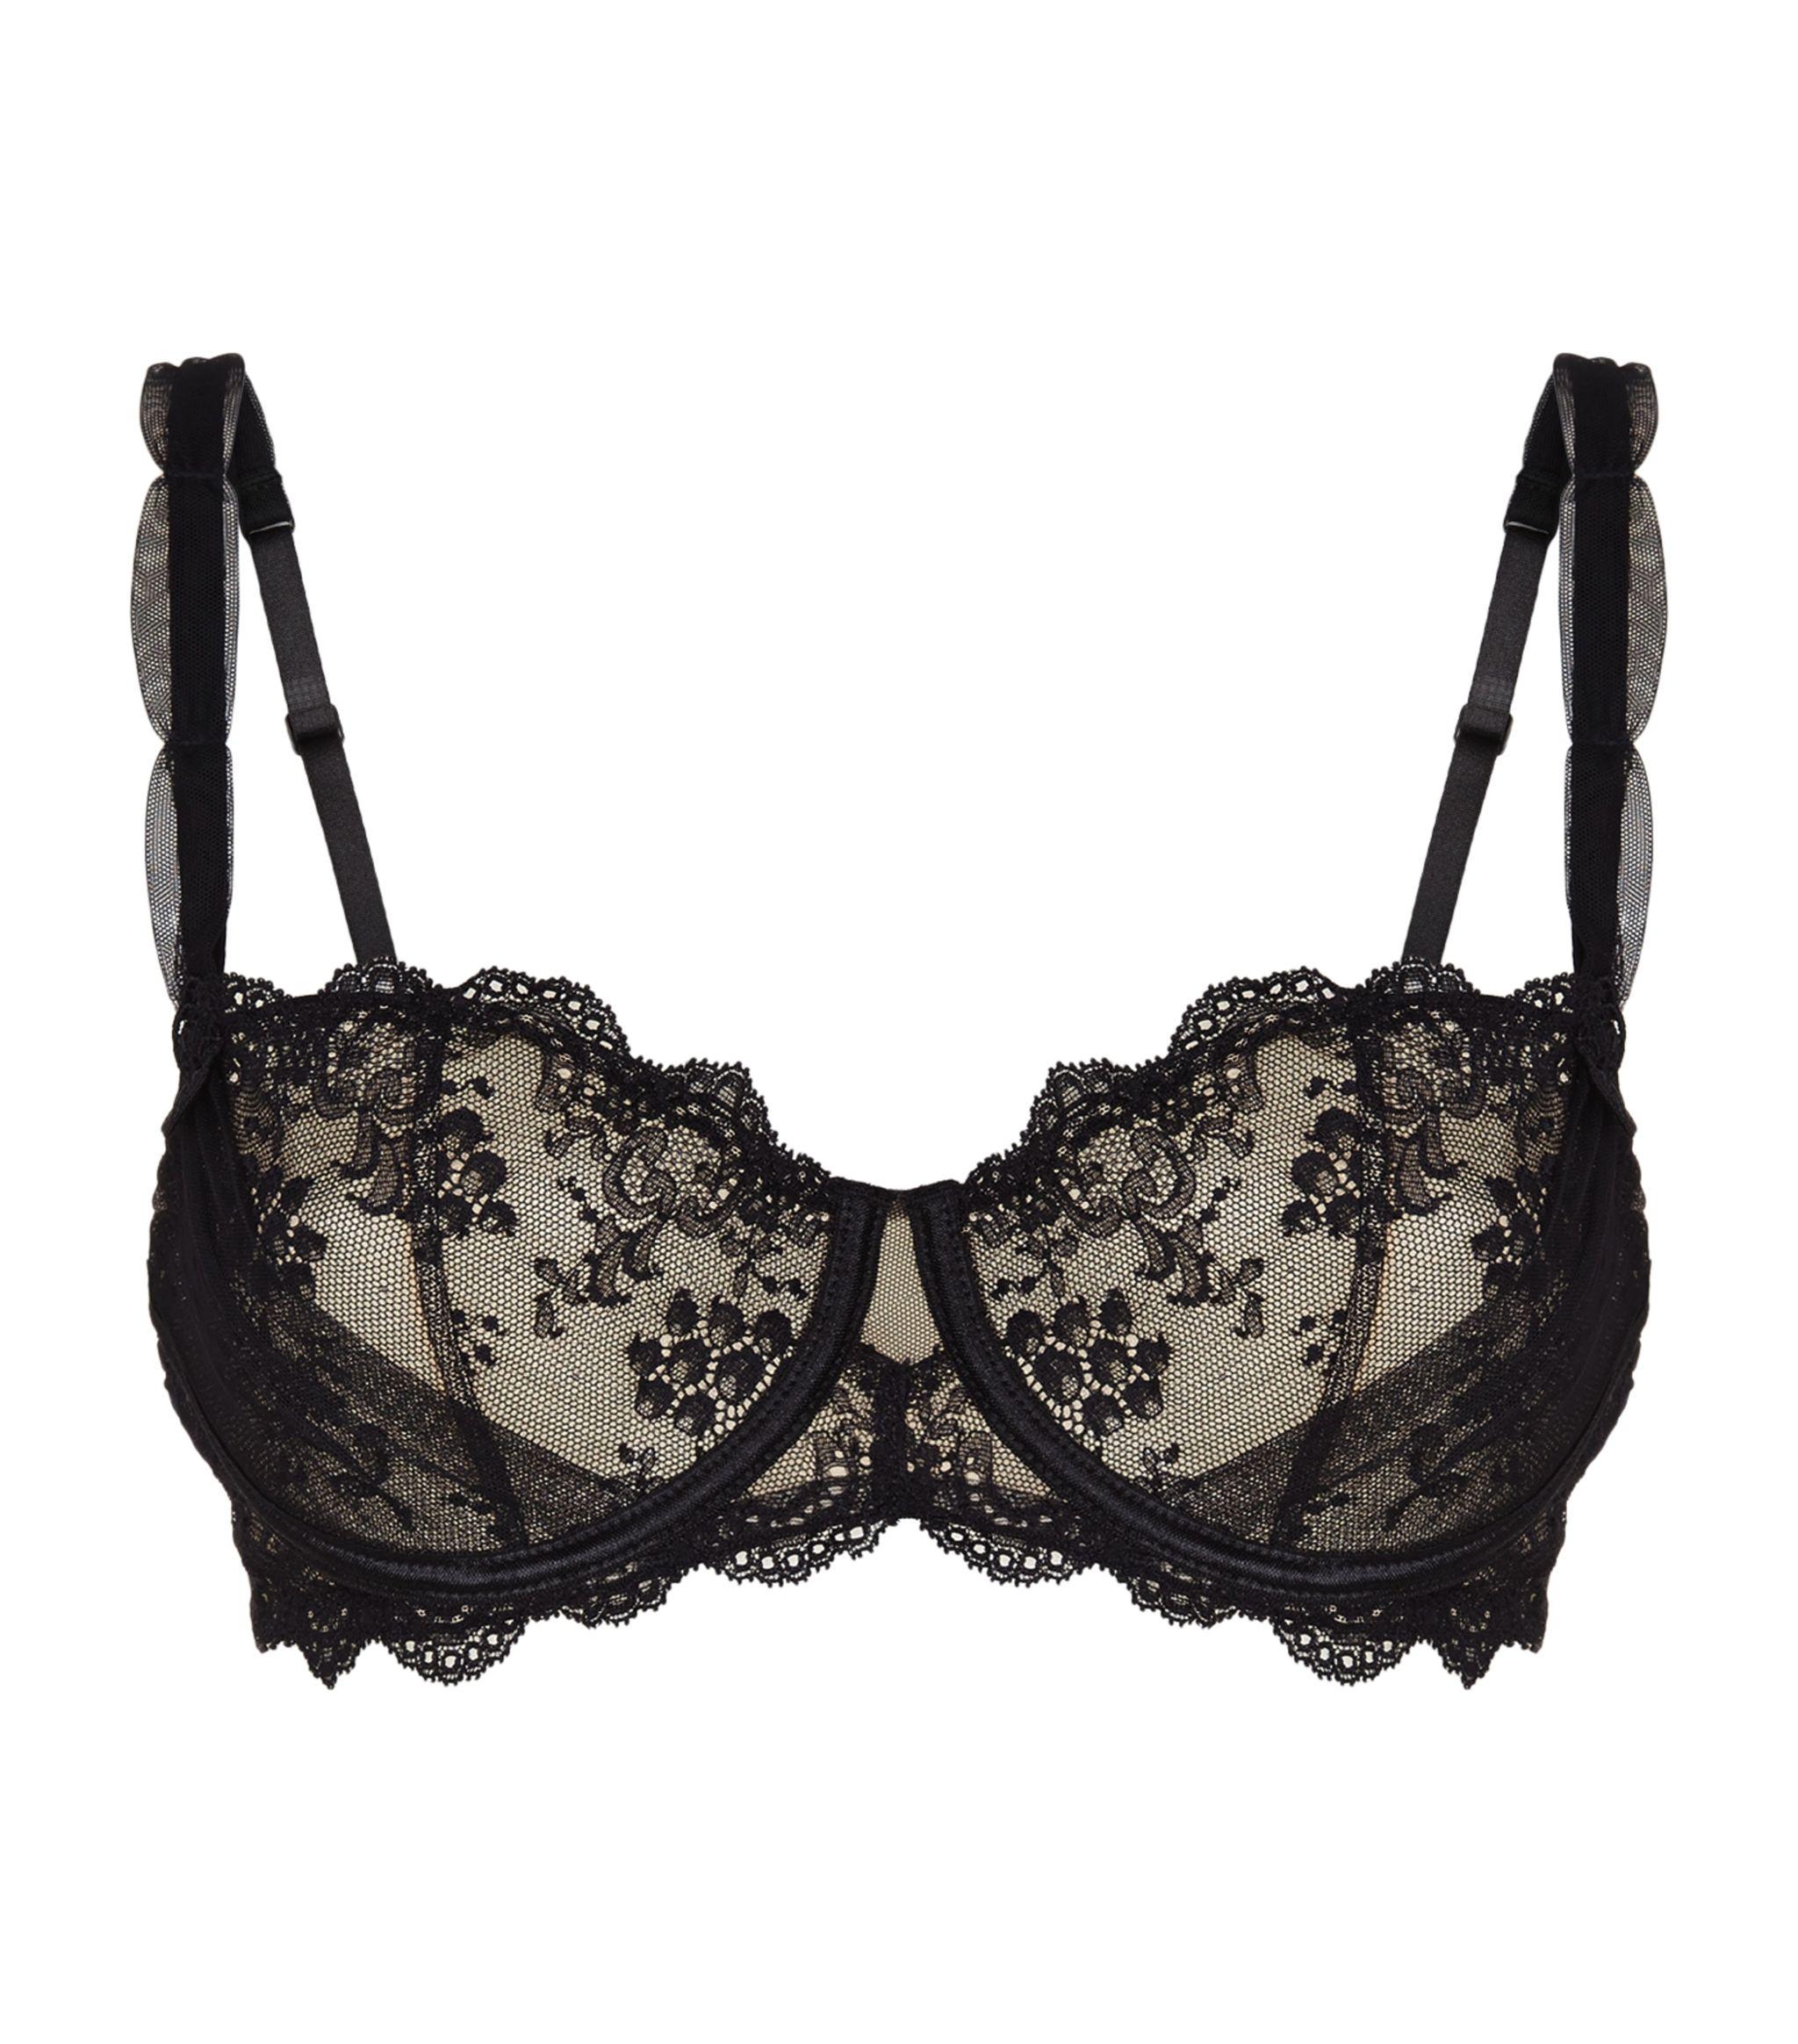 Aubade Lace Half Cup Bra in Black - Save 2% - Lyst